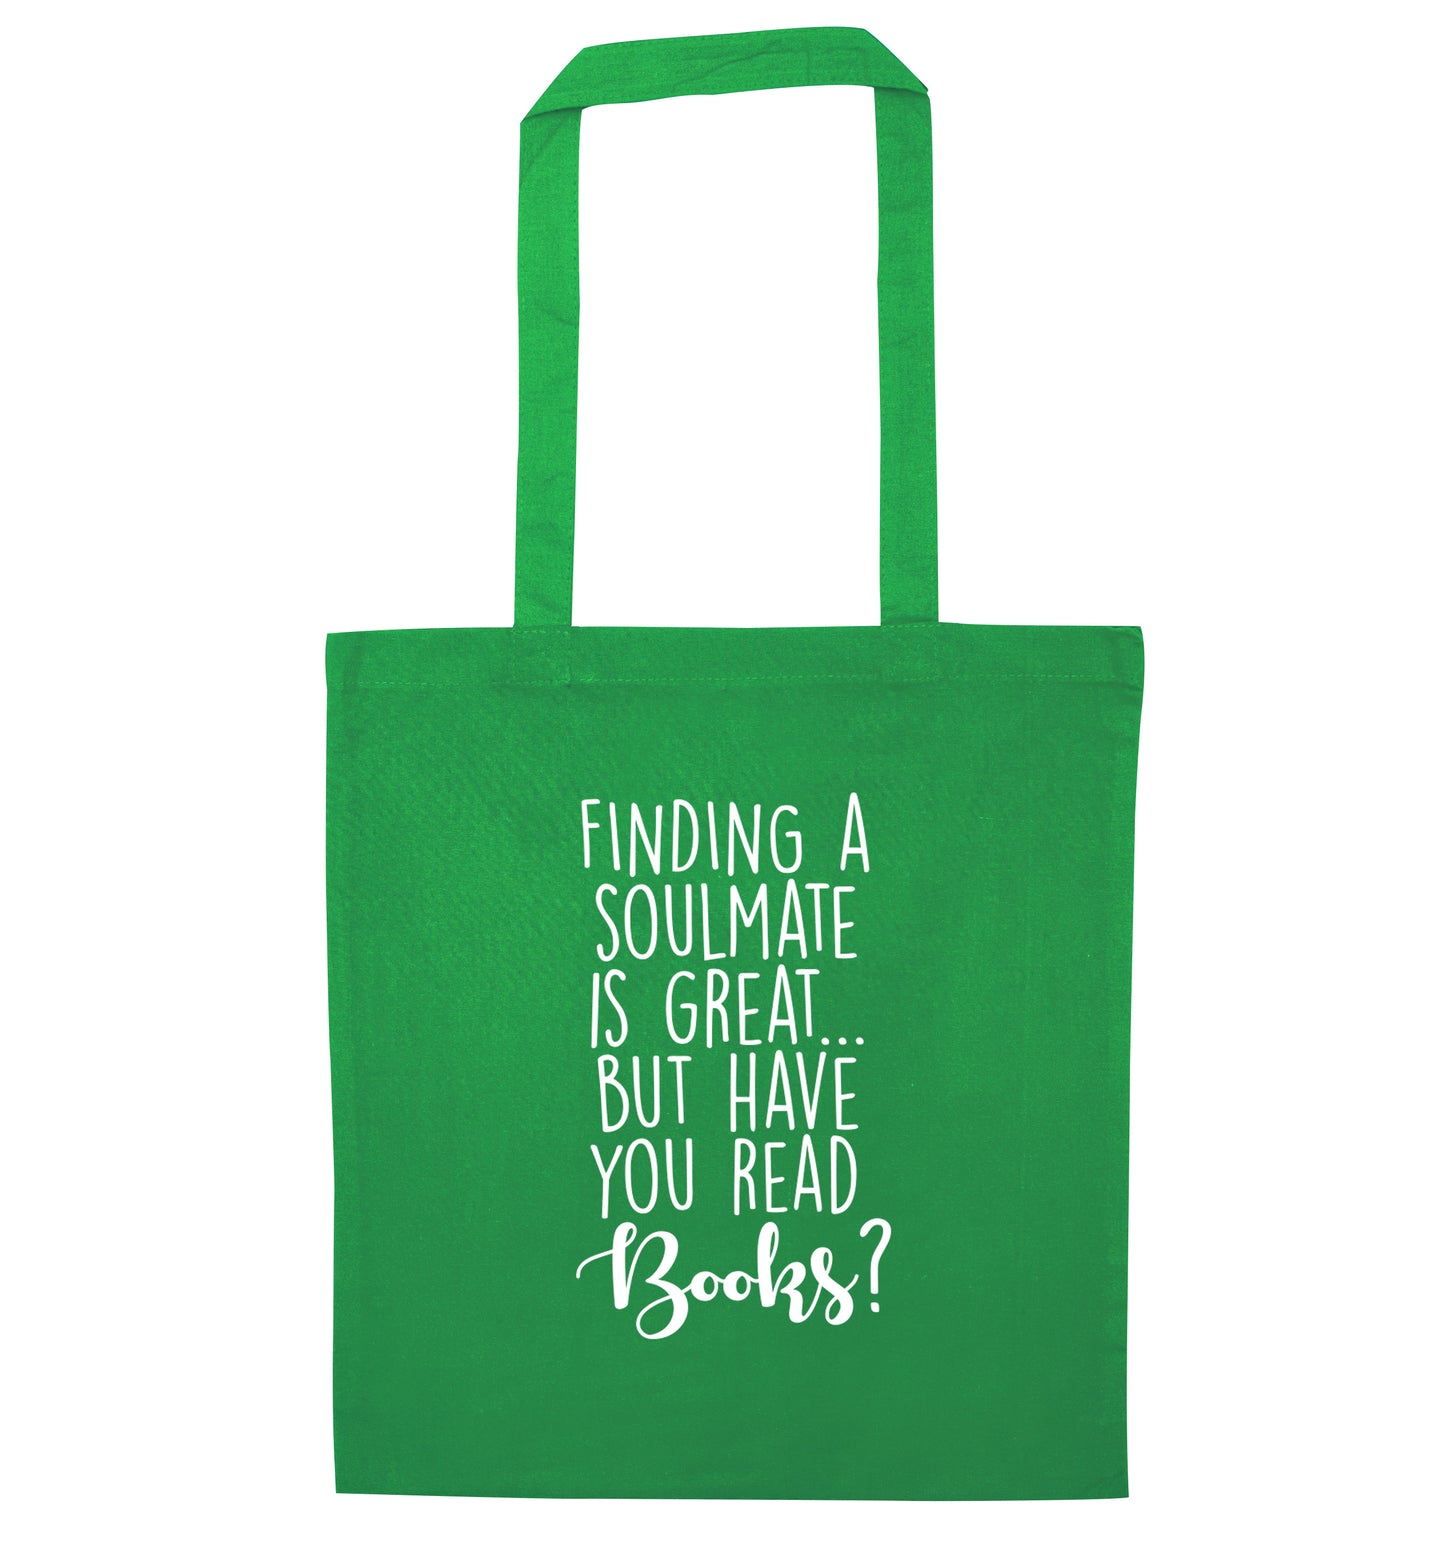 Finding a soulmate is great but have you read books? green tote bag